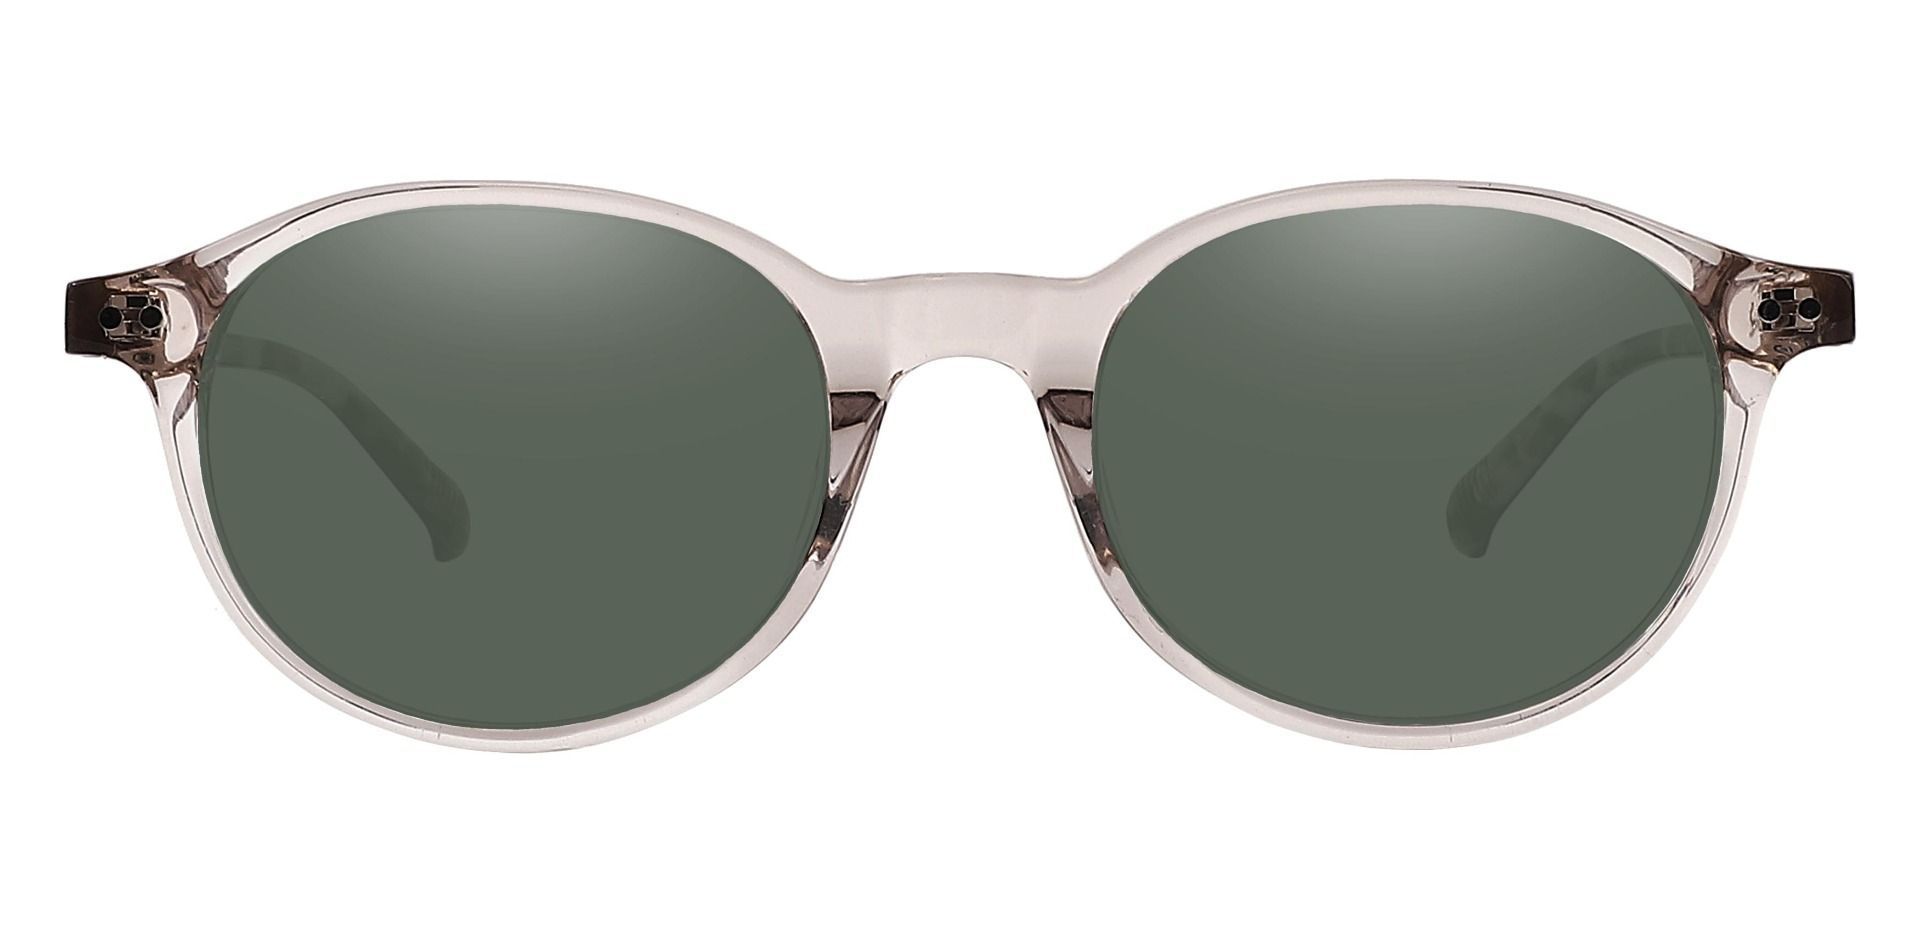 Avon Oval Reading Sunglasses - Clear Frame With Green Lenses